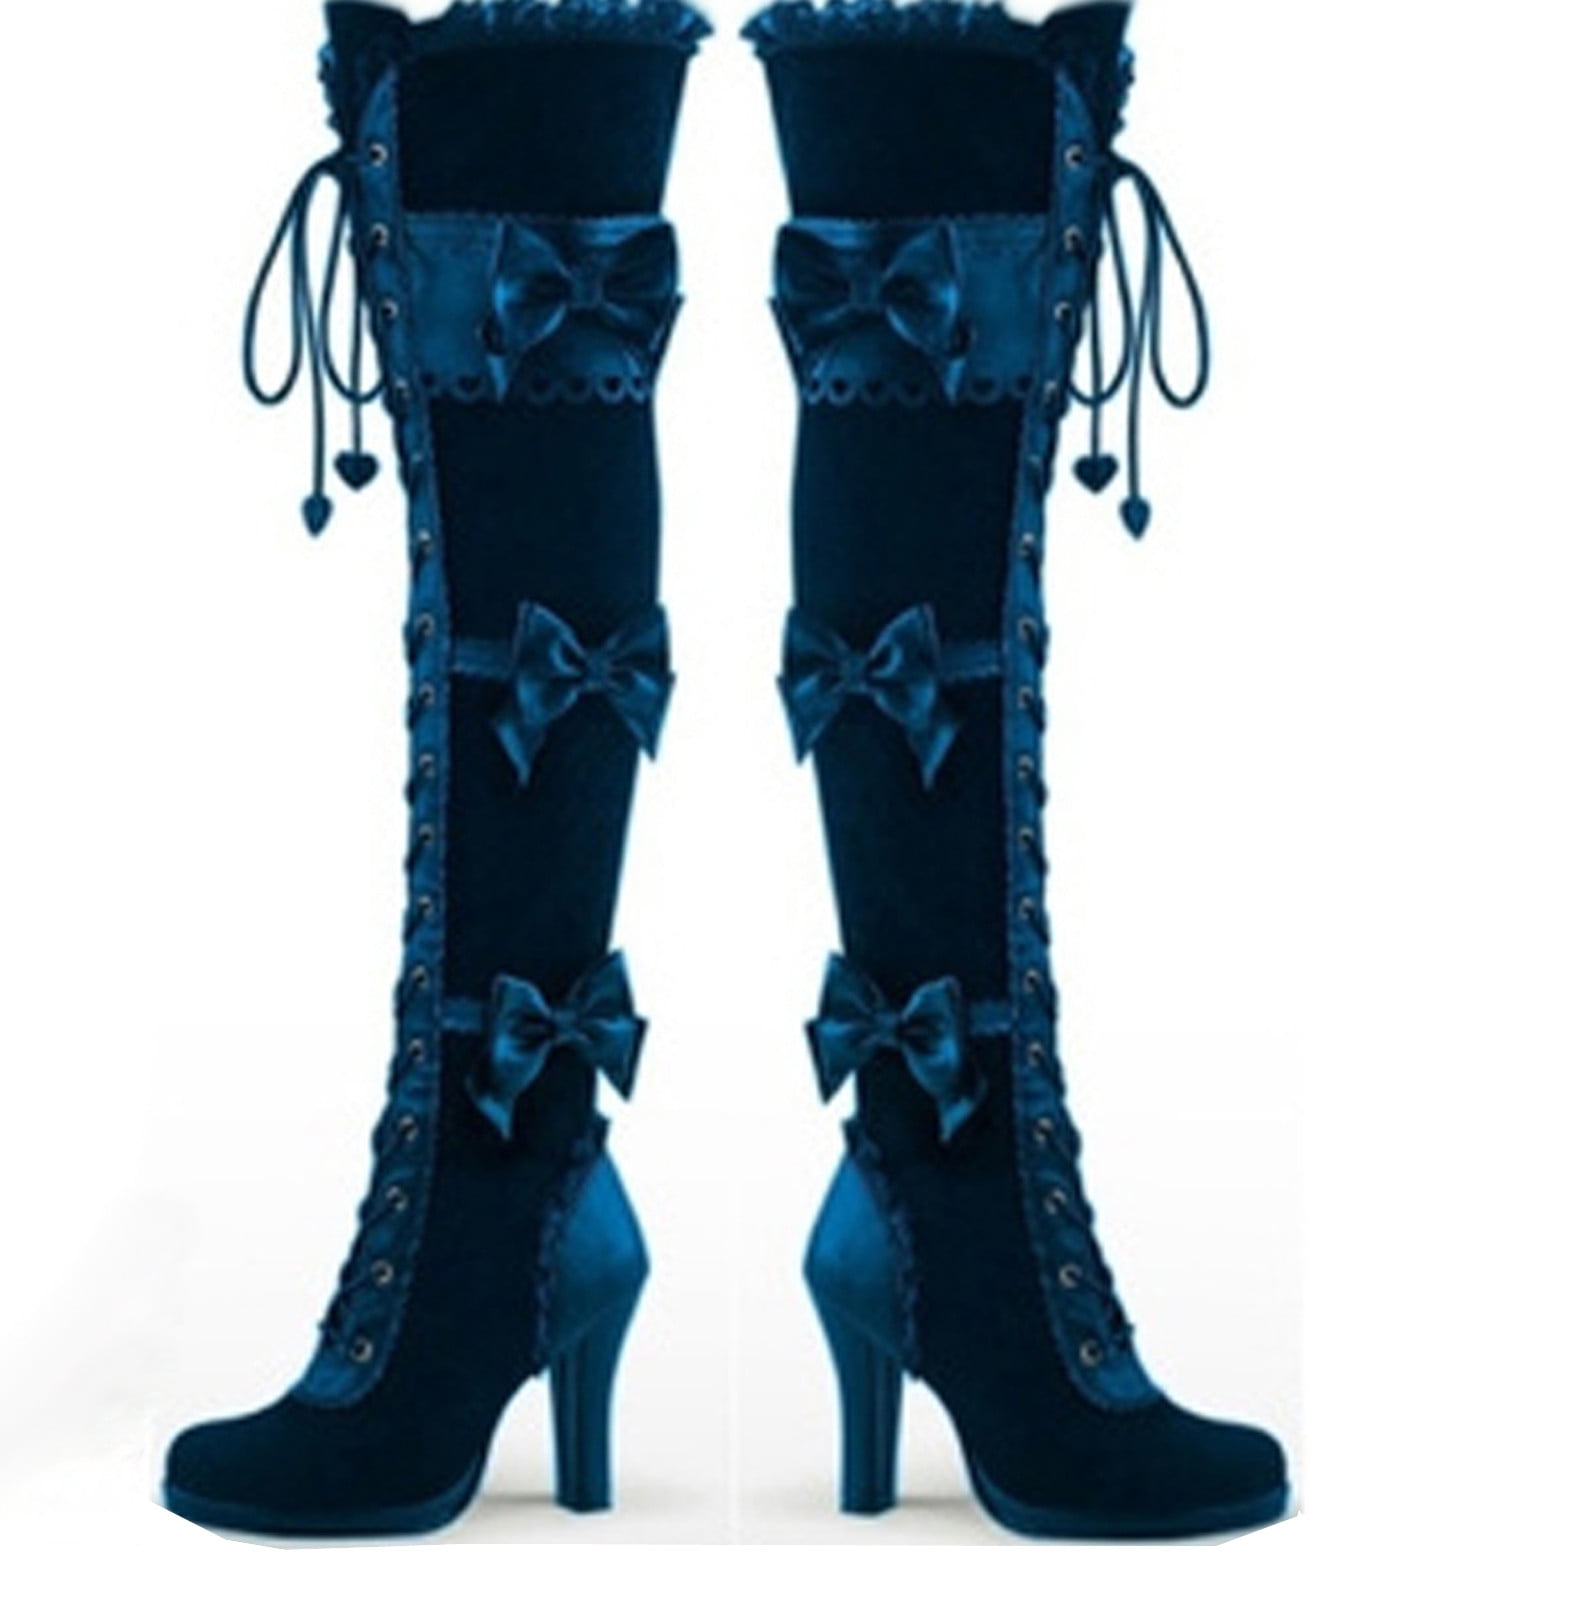 Women's Patent Leather Punk Thigh High Boots Over Knee Round Toe Heel Shoes Club 